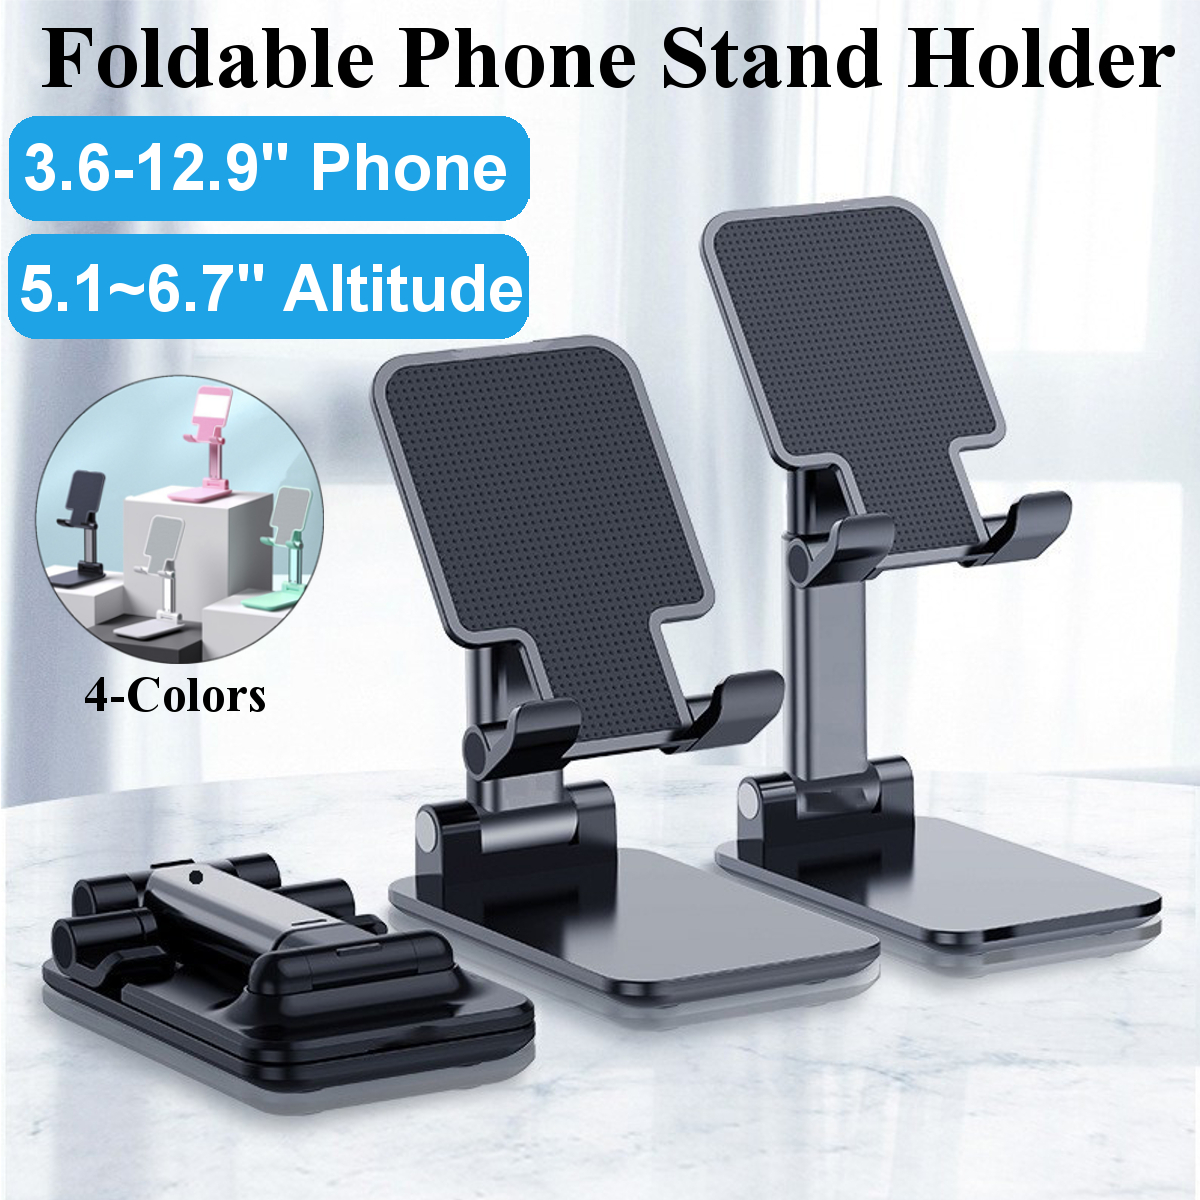 CCT4-Universal-Folding-Telescopic-Desktop-Mobile-Phone-Tablet-Holder-Stand-for-iPad-Air-for-iPhone-1-1811828-1